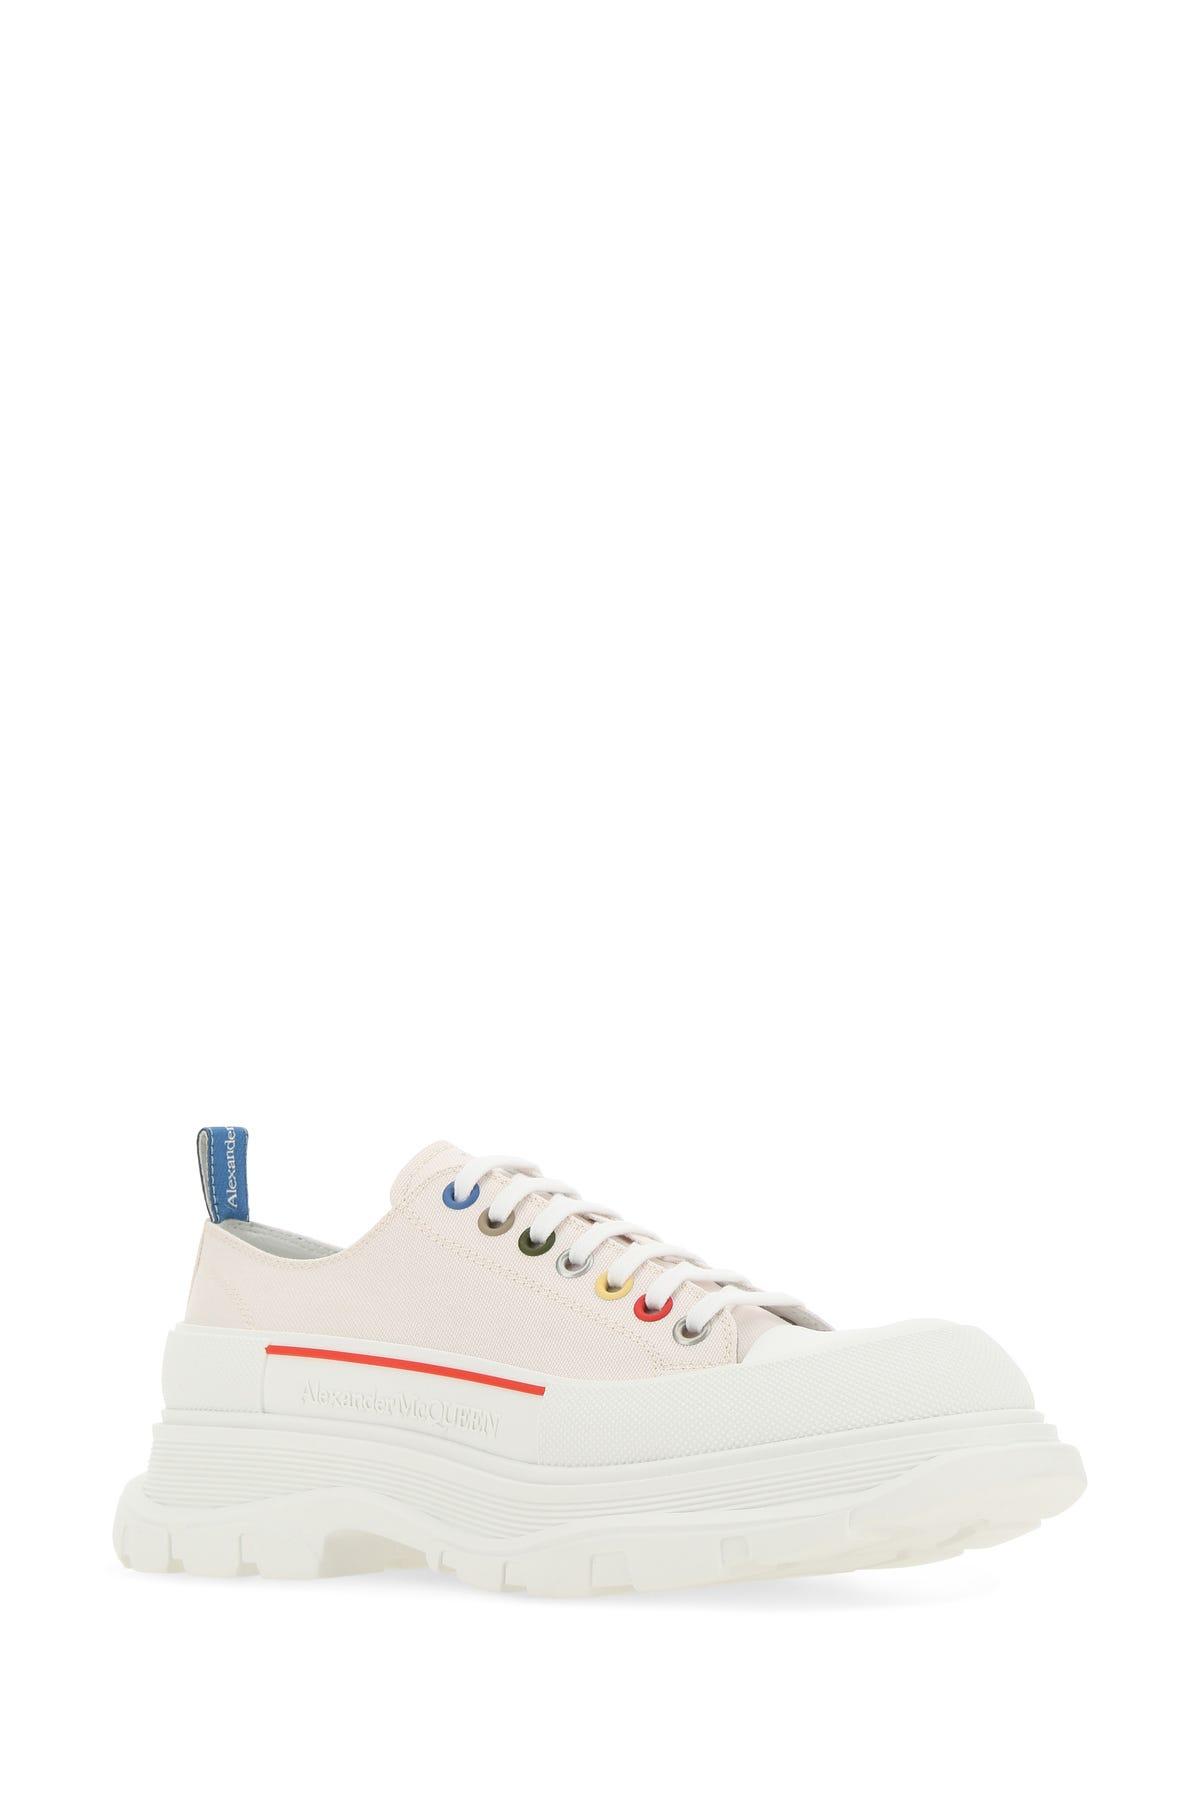 Alexander McQueen Ivory Canvas Tread Slick Sneakers in White for 